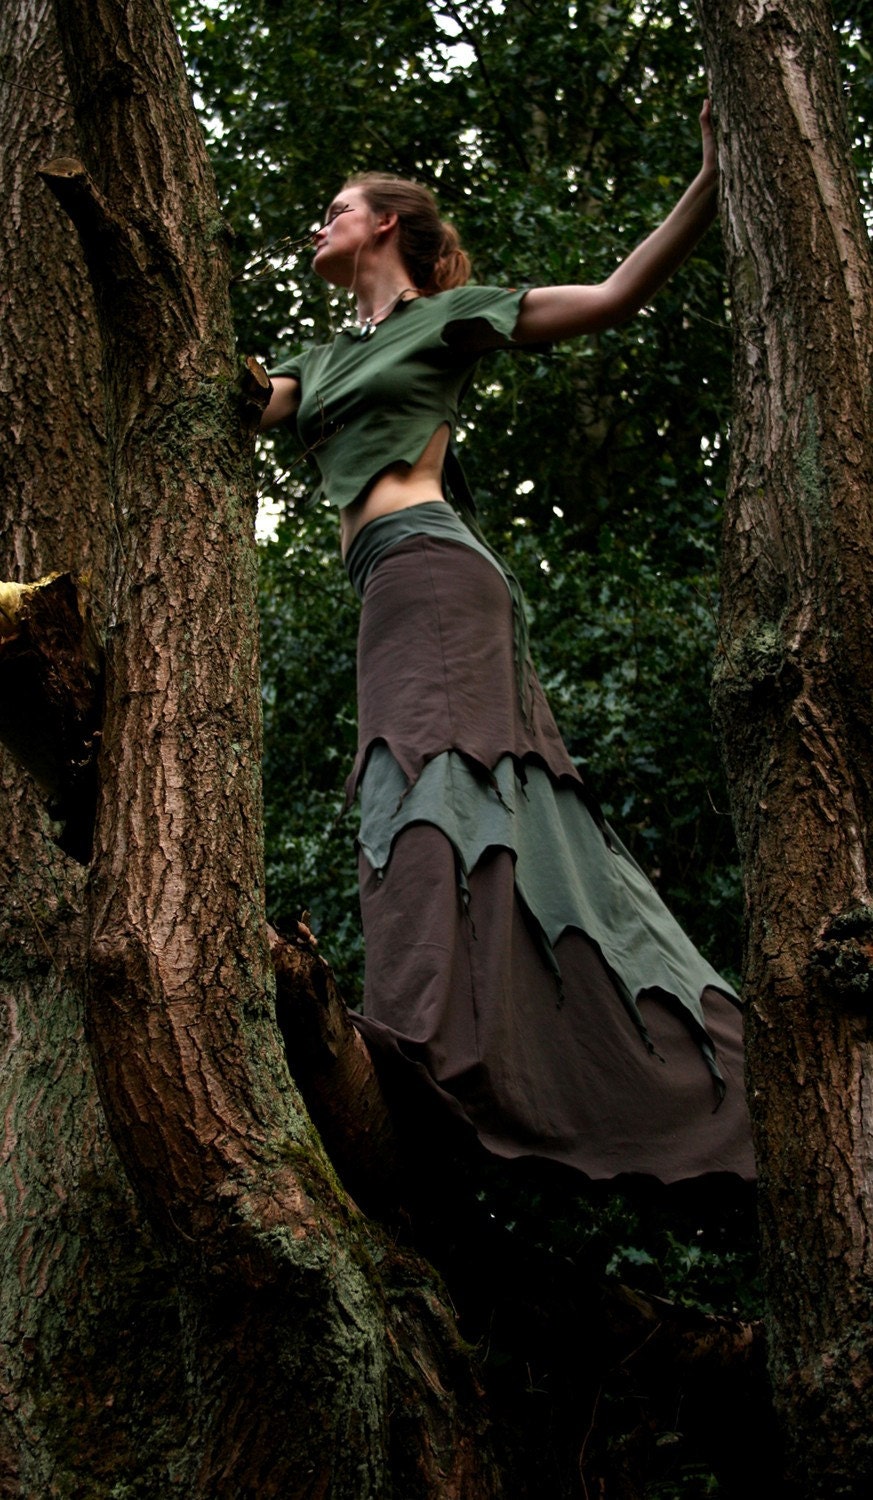 Long Skirt - SilverBirch Skirt - Custom Made to Order - Cotton Jersey - Faerie - Goddess - Gothic Wear - Quintessential Forest Camouflage